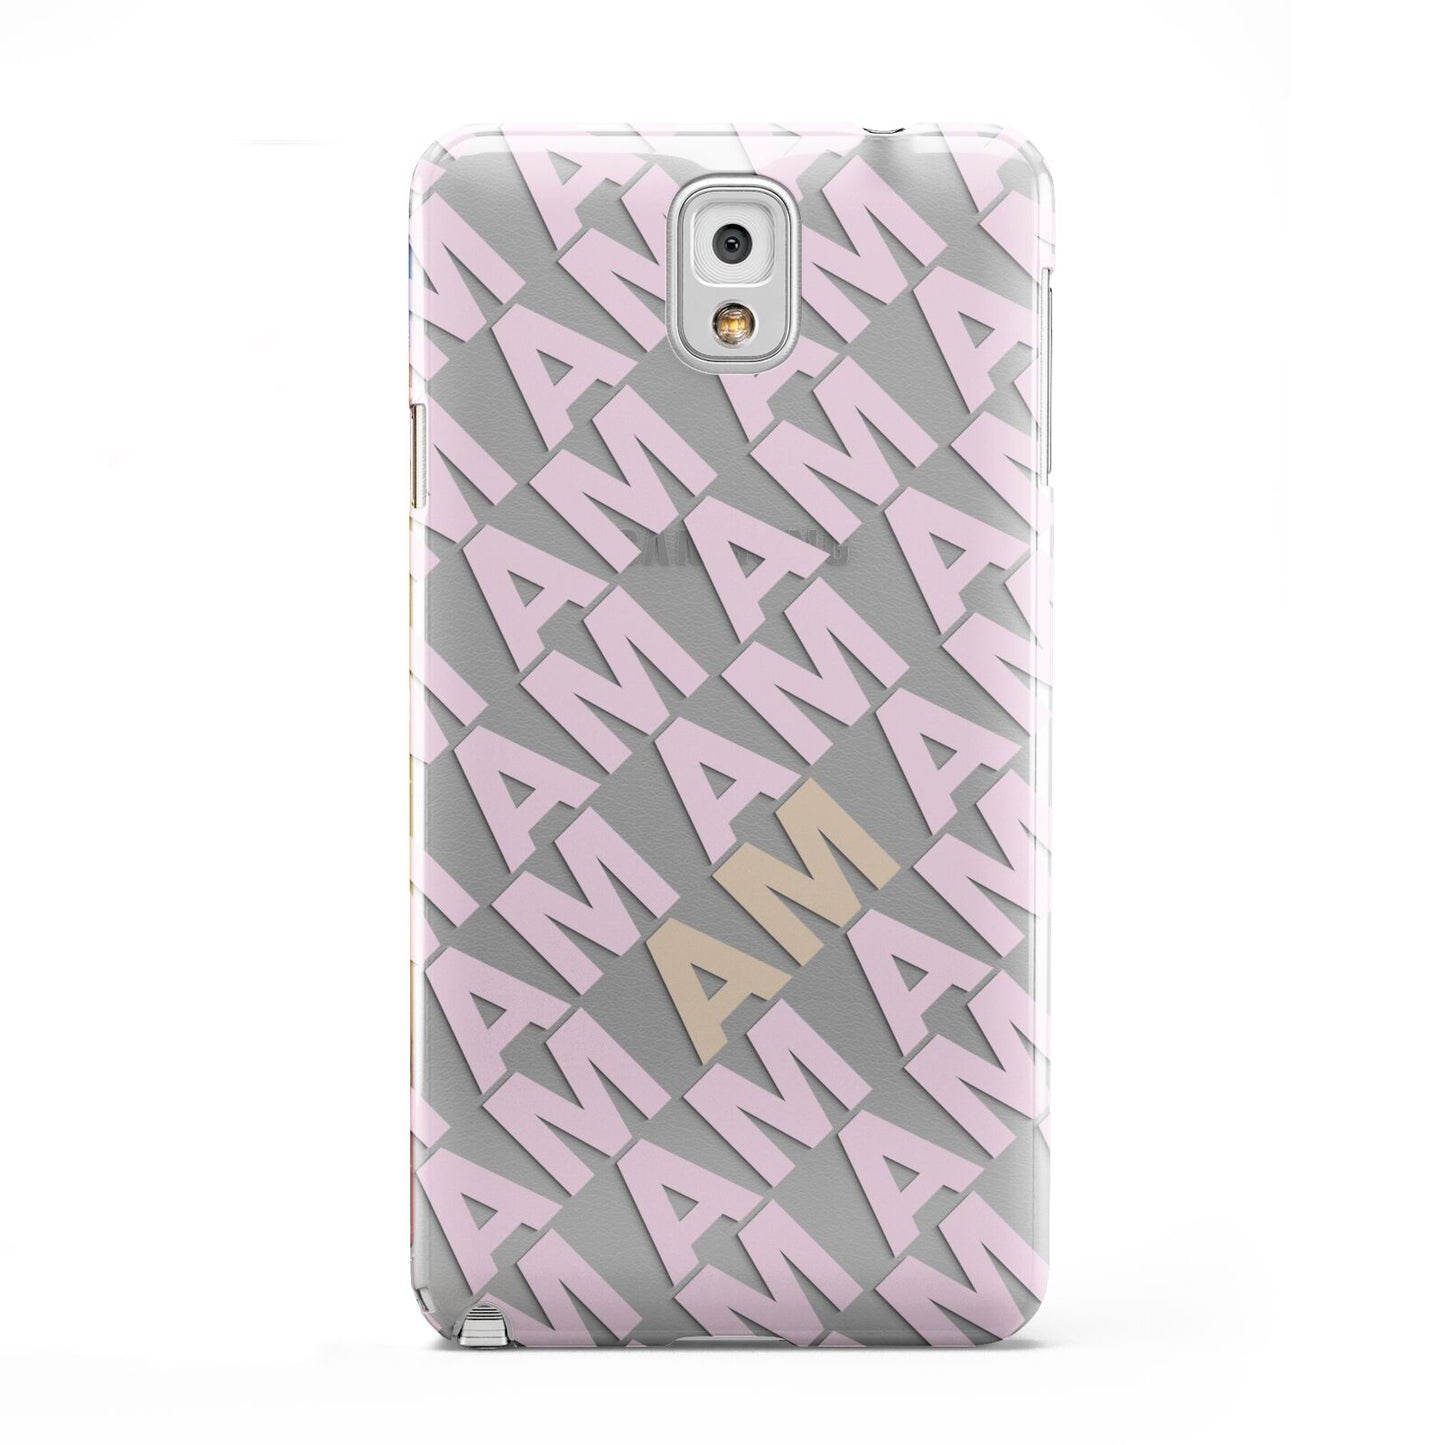 Personalised Diagonal Bold Initials Samsung Galaxy Note 3 Case